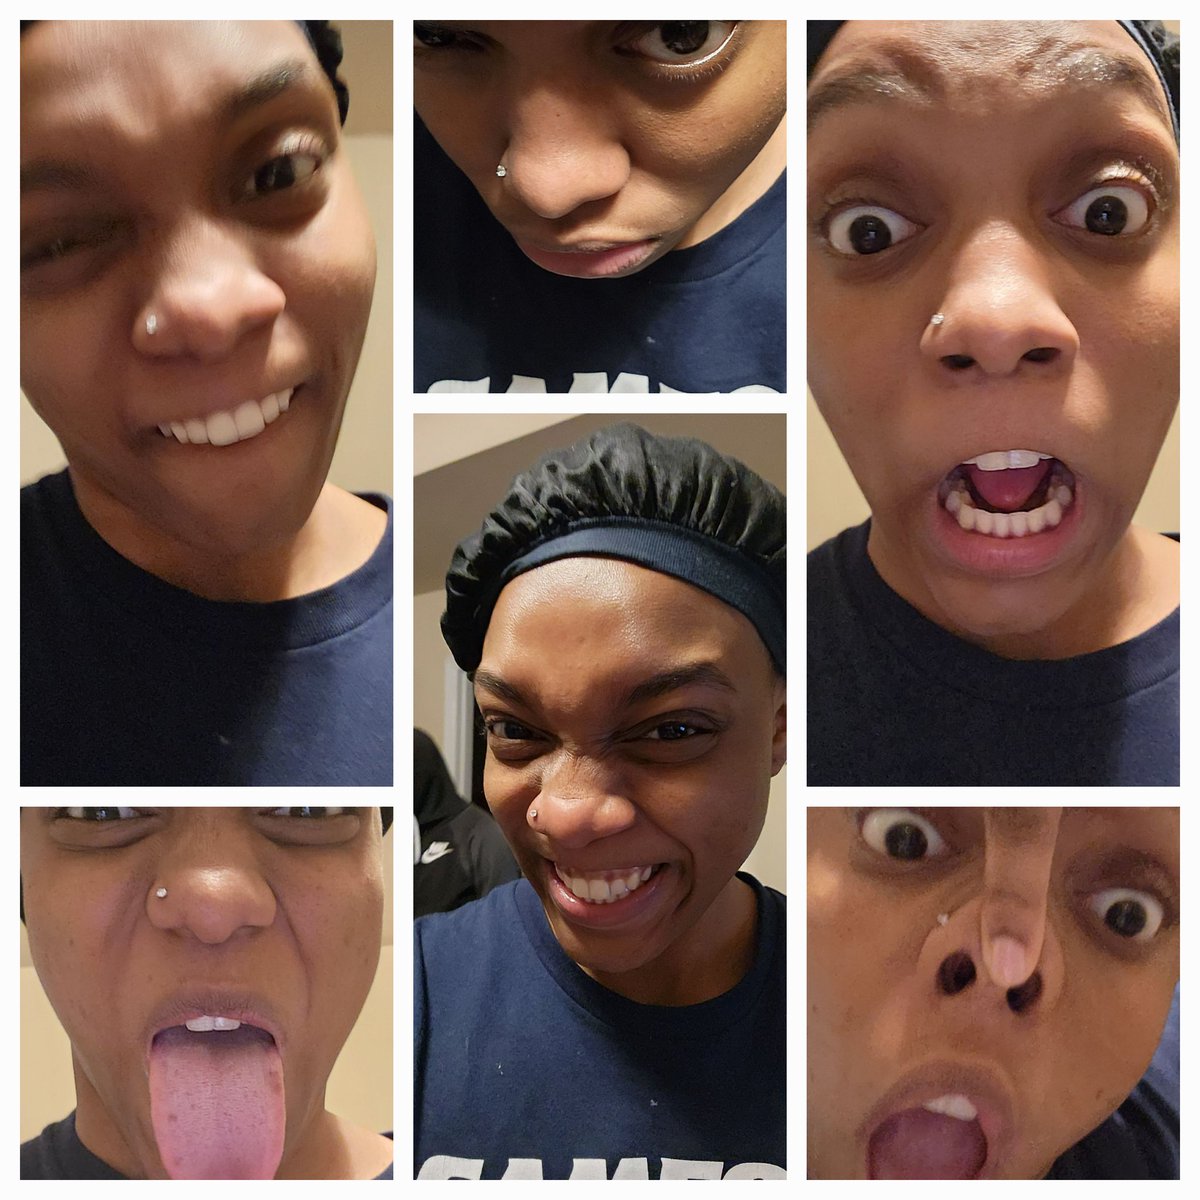 ⚠️ @SaritaEdwards don't leave your phone unattended... you may find this person on your camera roll if you do. 🙄